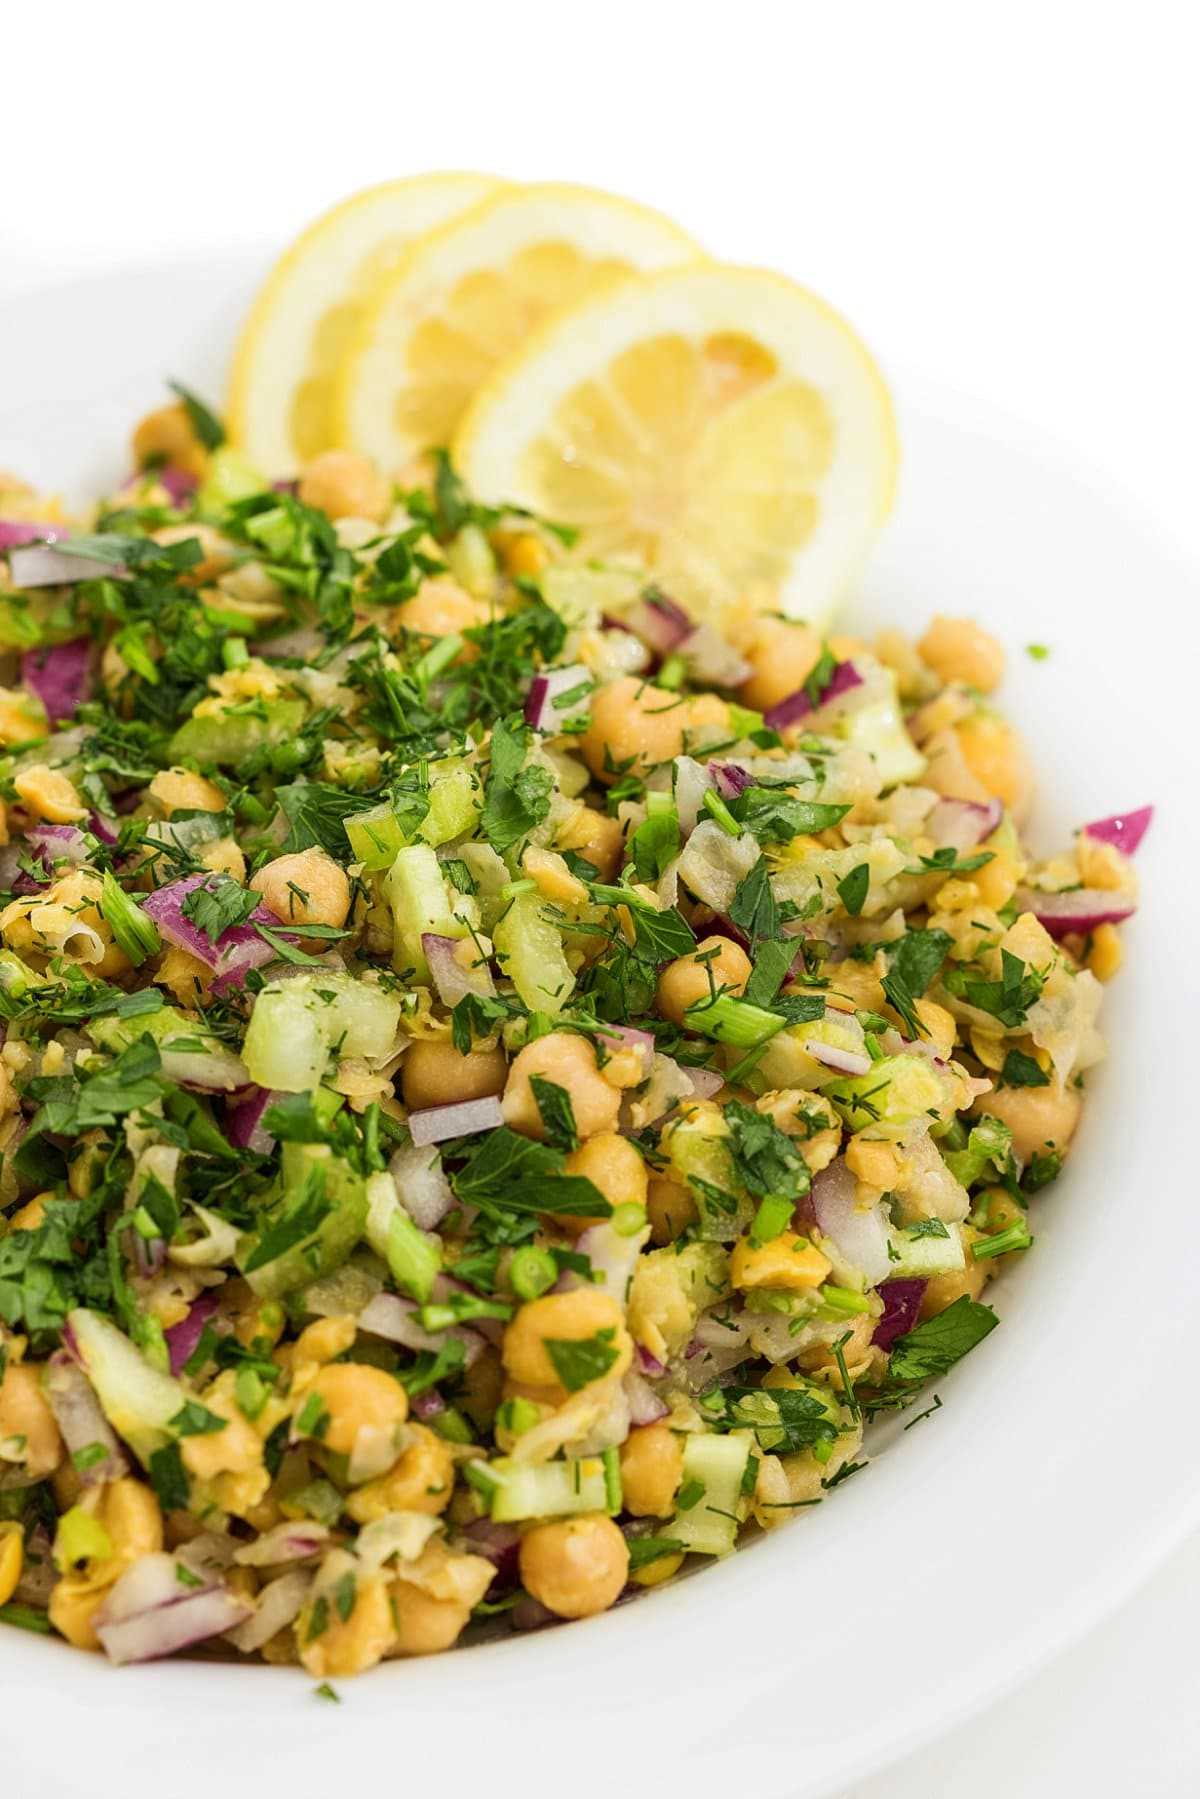 Smashed chickpea salad with dill on a plate.